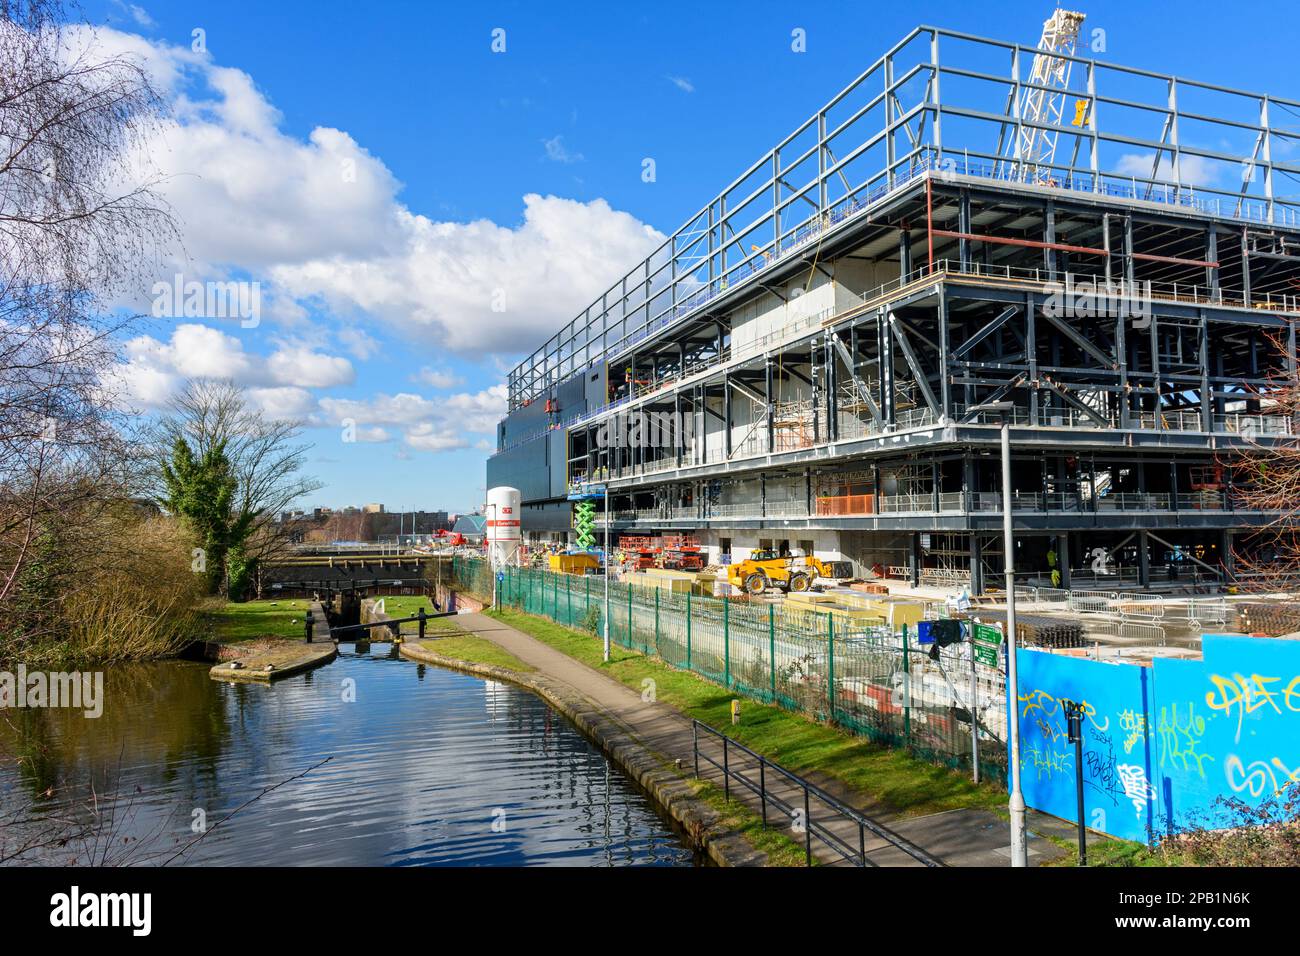 The Co-op Live arena (under construction) by the Ashton Canal, next to the Etihad Stadium, Manchester, England, UK Stock Photo